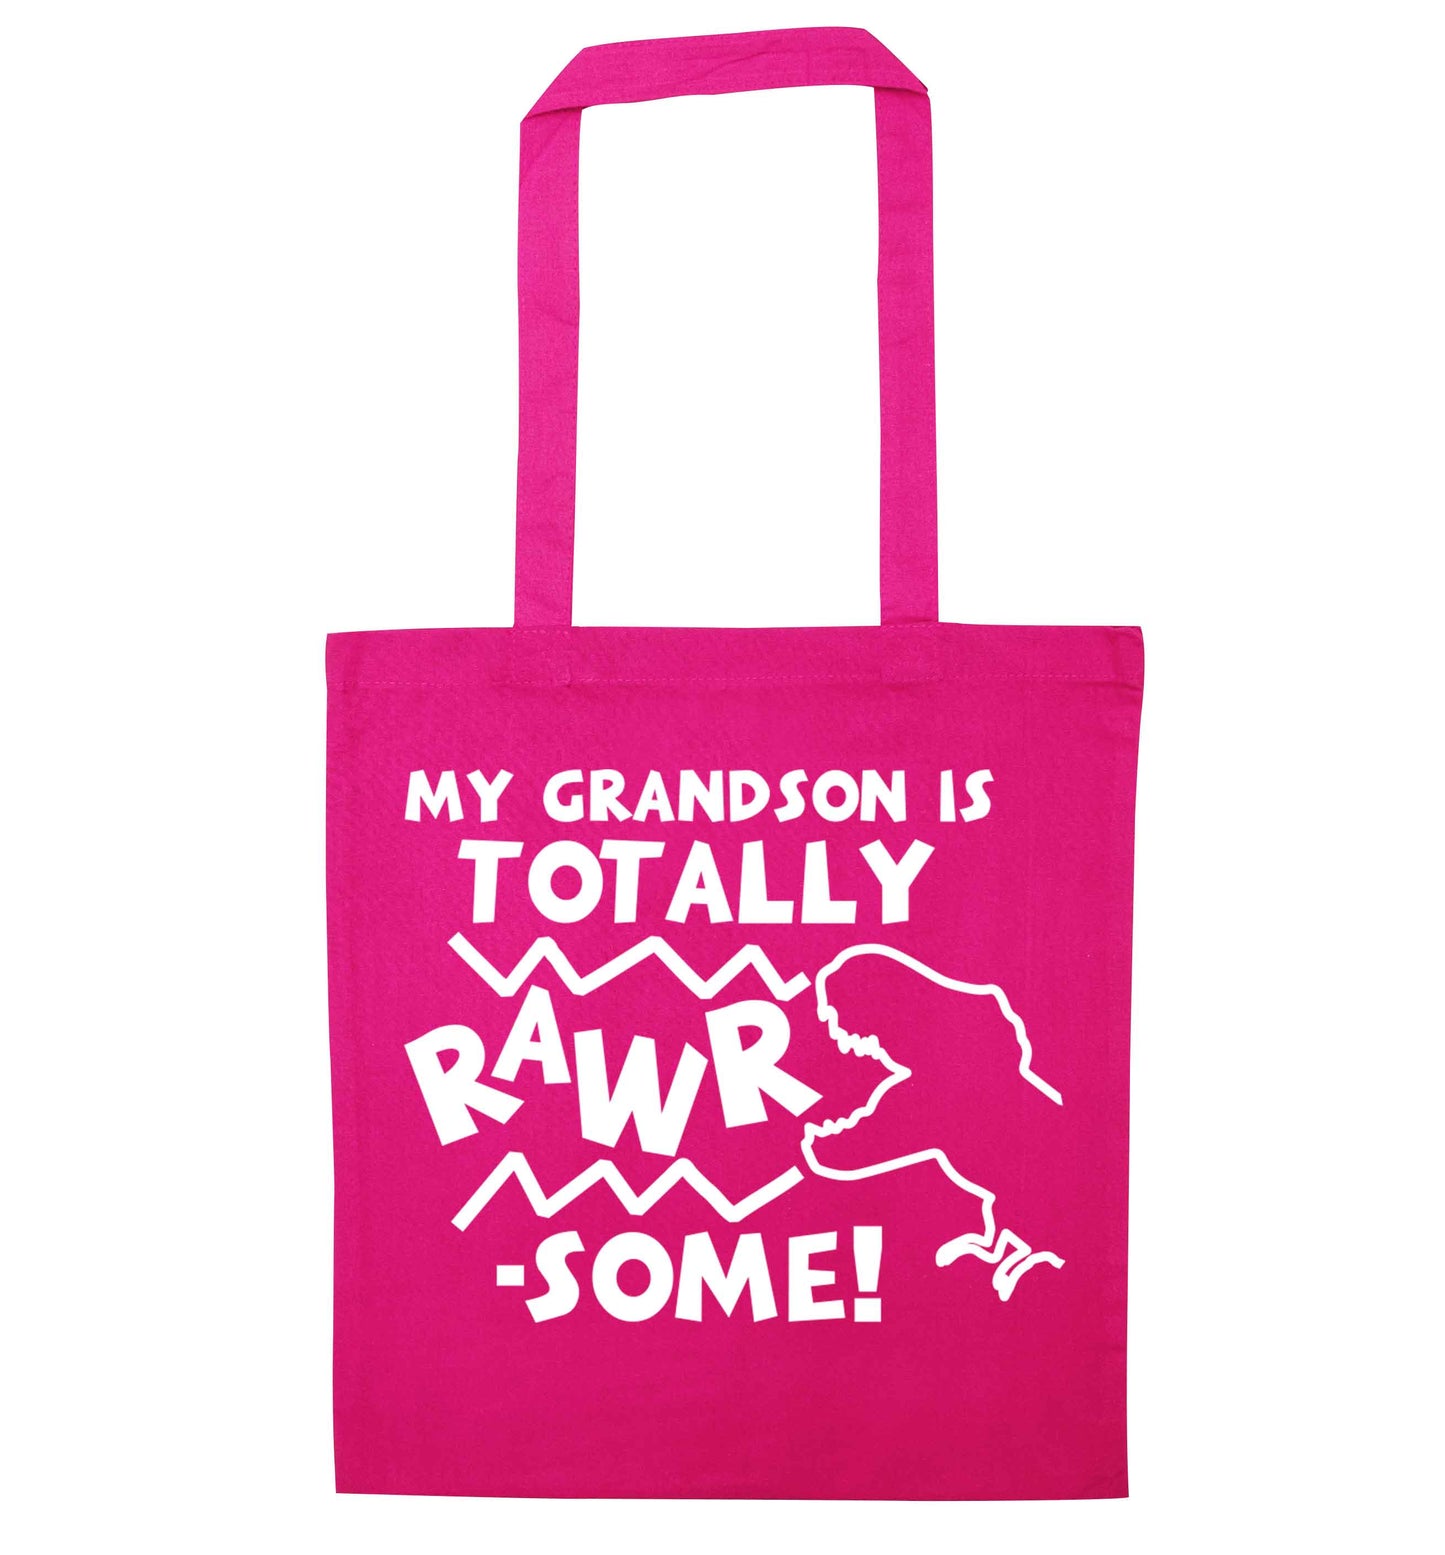 My grandson is totally rawrsome pink tote bag